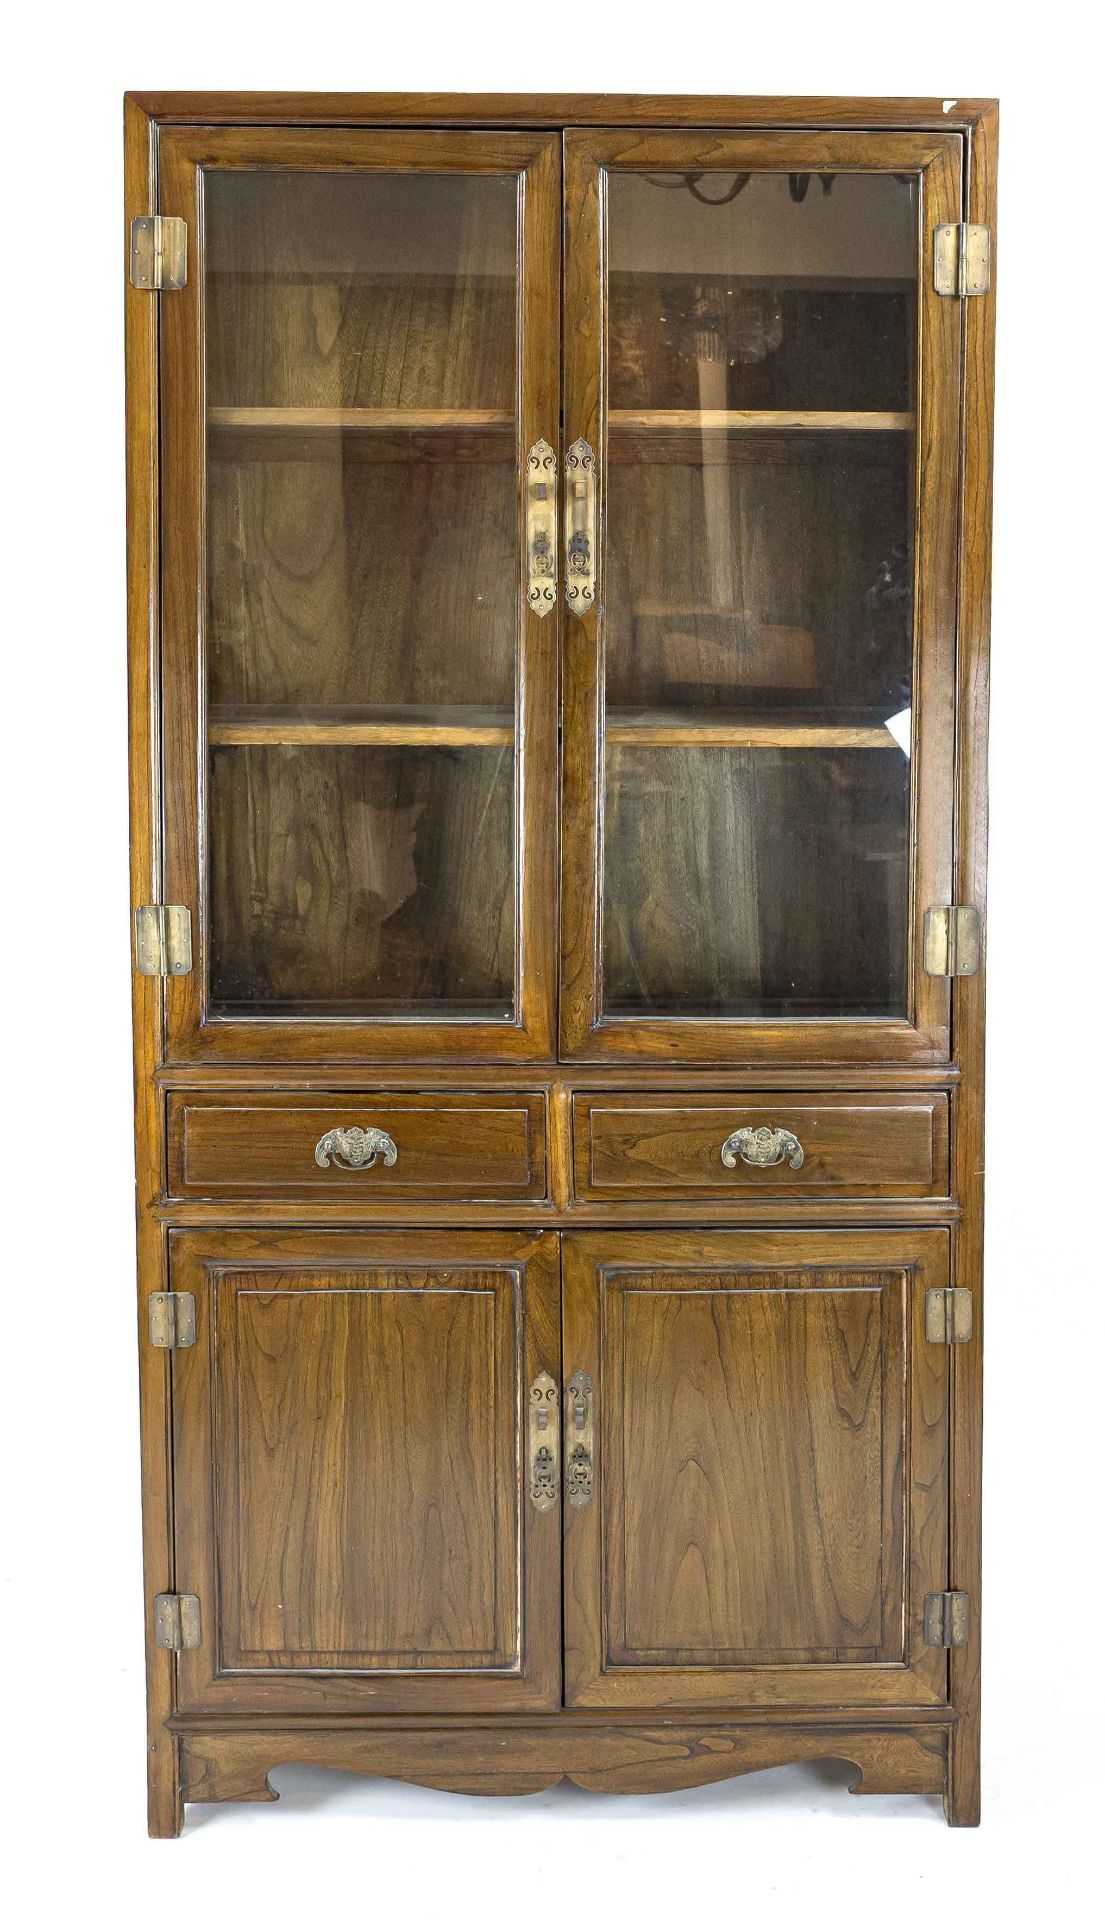 Asian display cabinet, 20th century, typical ash-like solid wood, two doors below, two drawers in